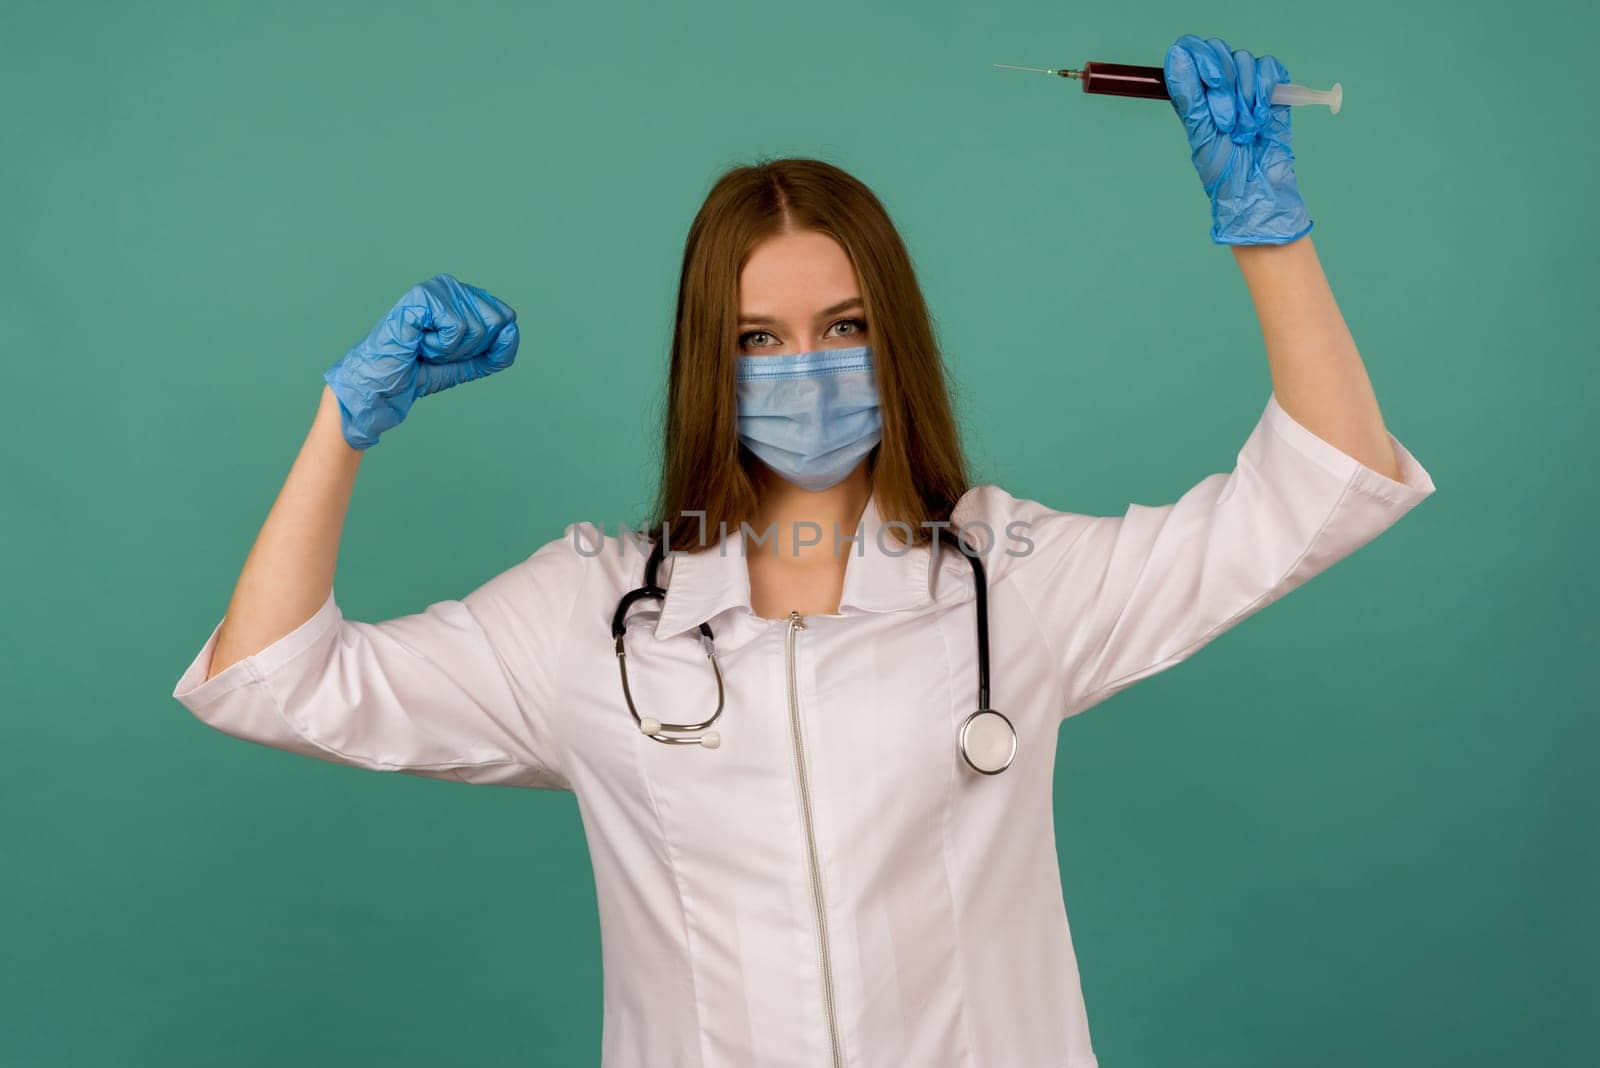 Covid19, coronavirus. Portrait of professional confident young caucasian doctor in medical mask and white coat, stethoscope over neck,with vaccine syringe in hand, fight disease - image